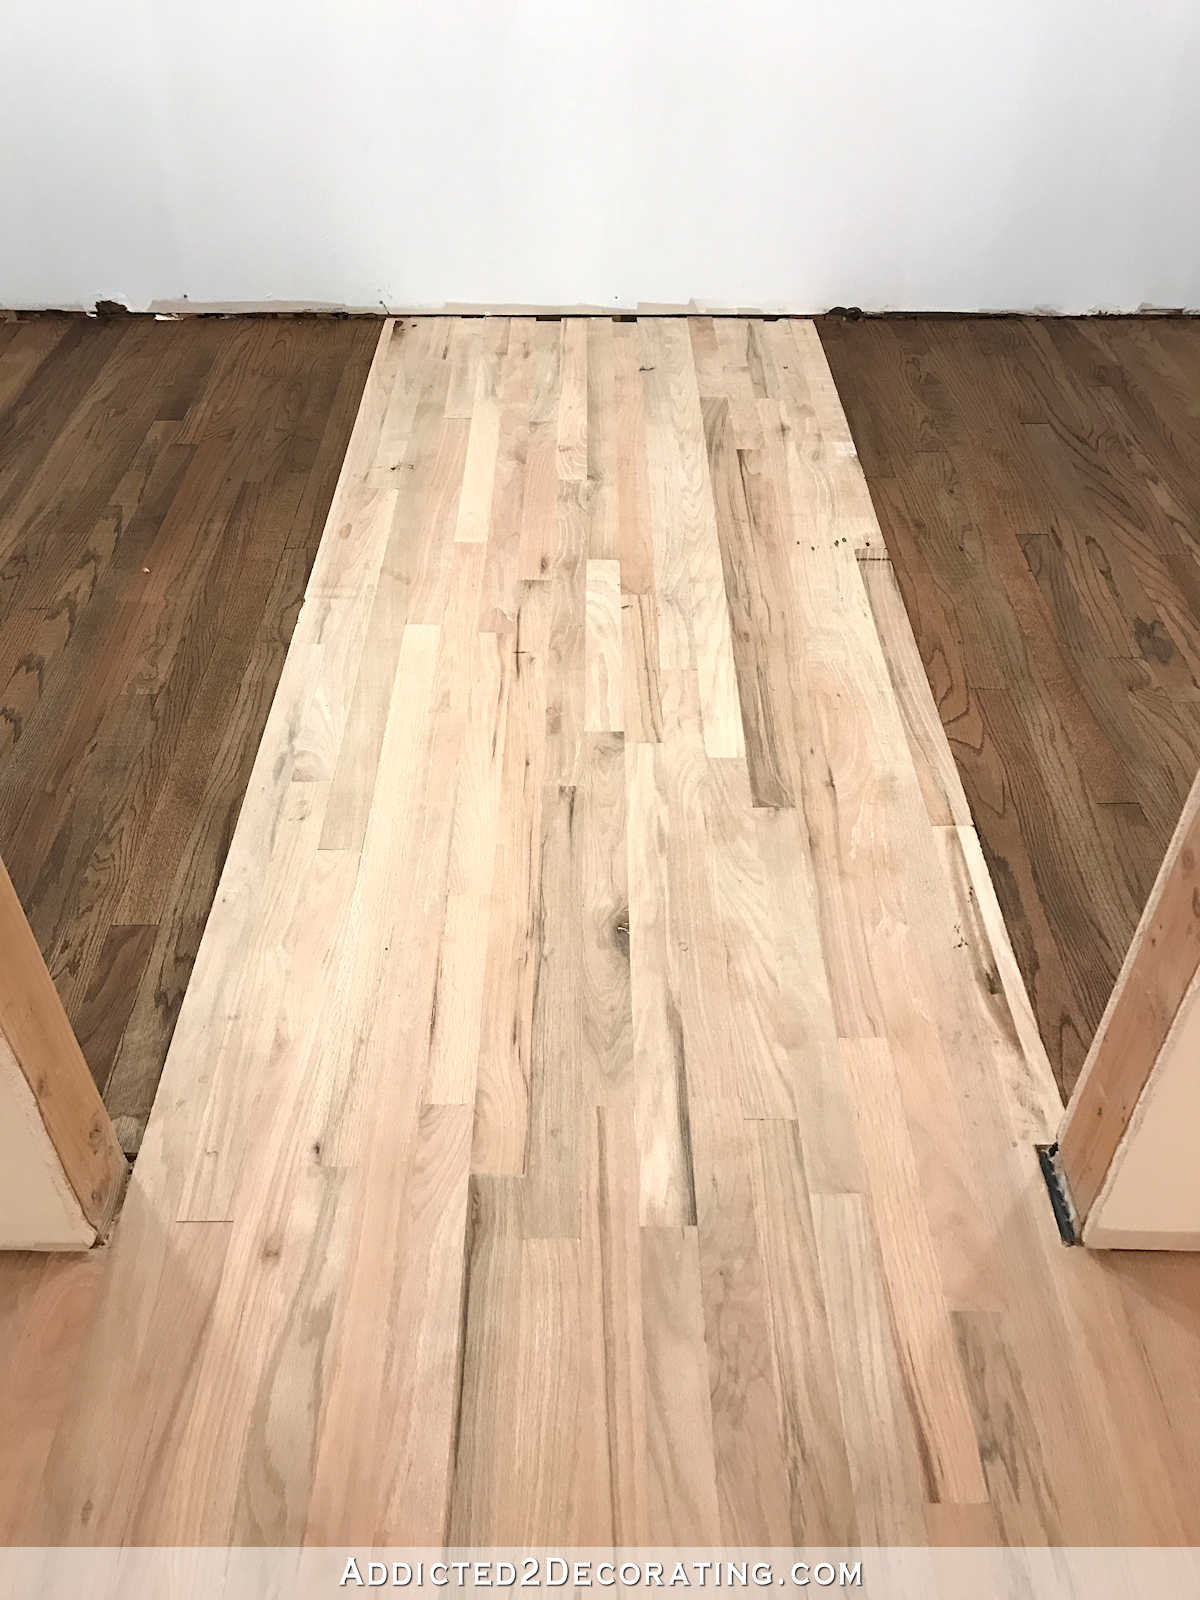 19 Awesome Hardwood Floor Finishing Supplies 2024 free download hardwood floor finishing supplies of adventures in staining my red oak hardwood floors products process in staining red oak hardwood floors 11 stain on left and right sides of the